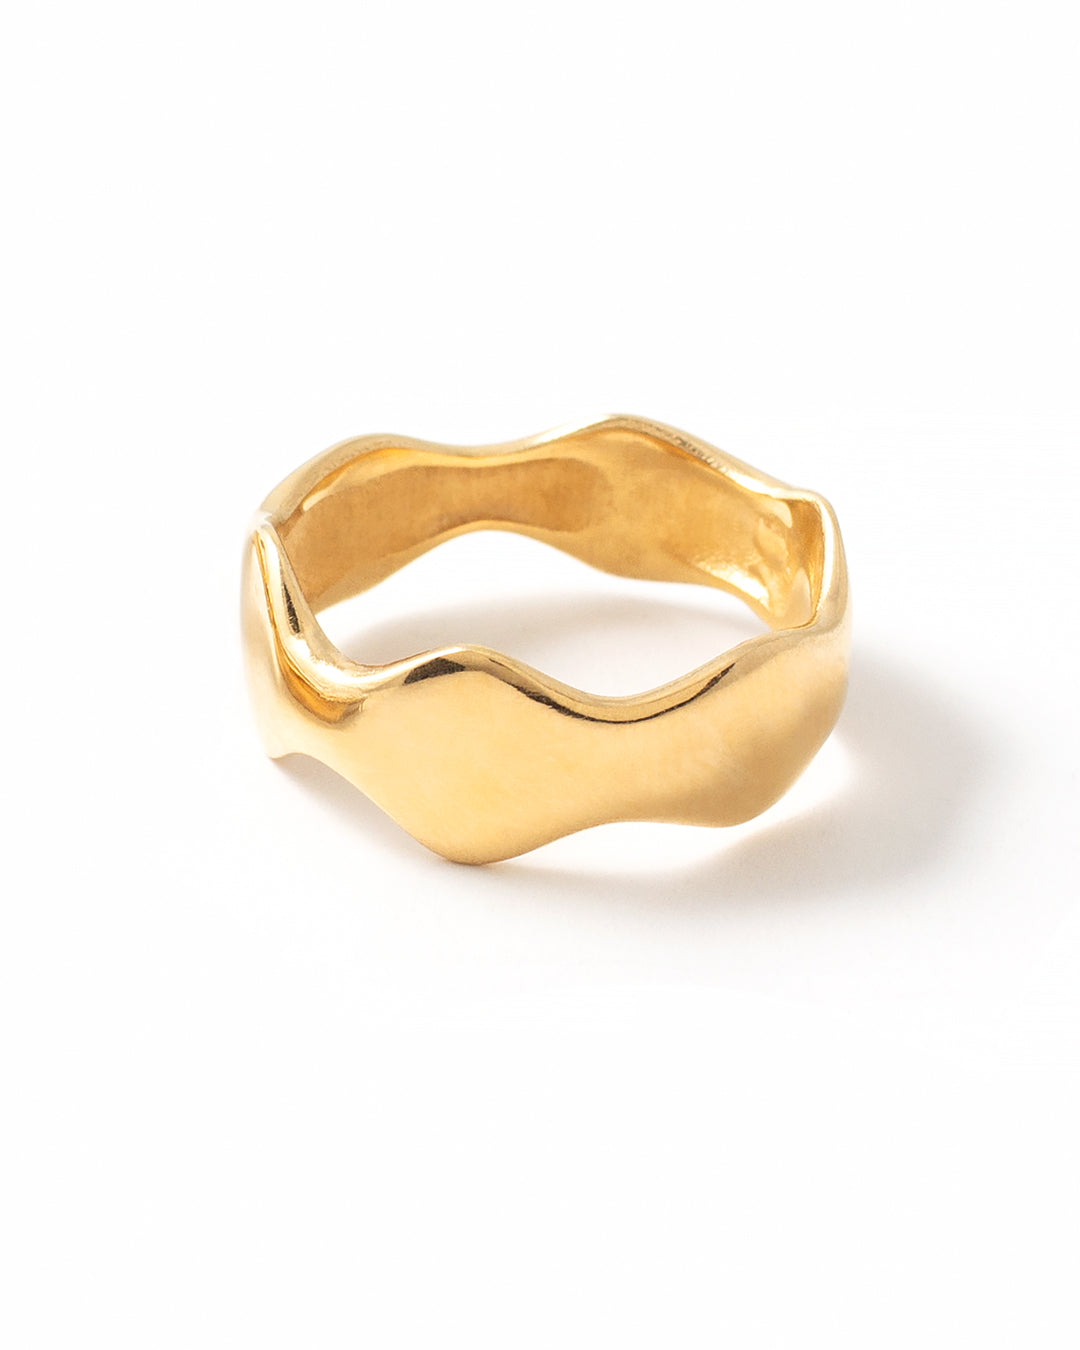 Rings | Fashioned by hand in Canada | wellDunn jewelry